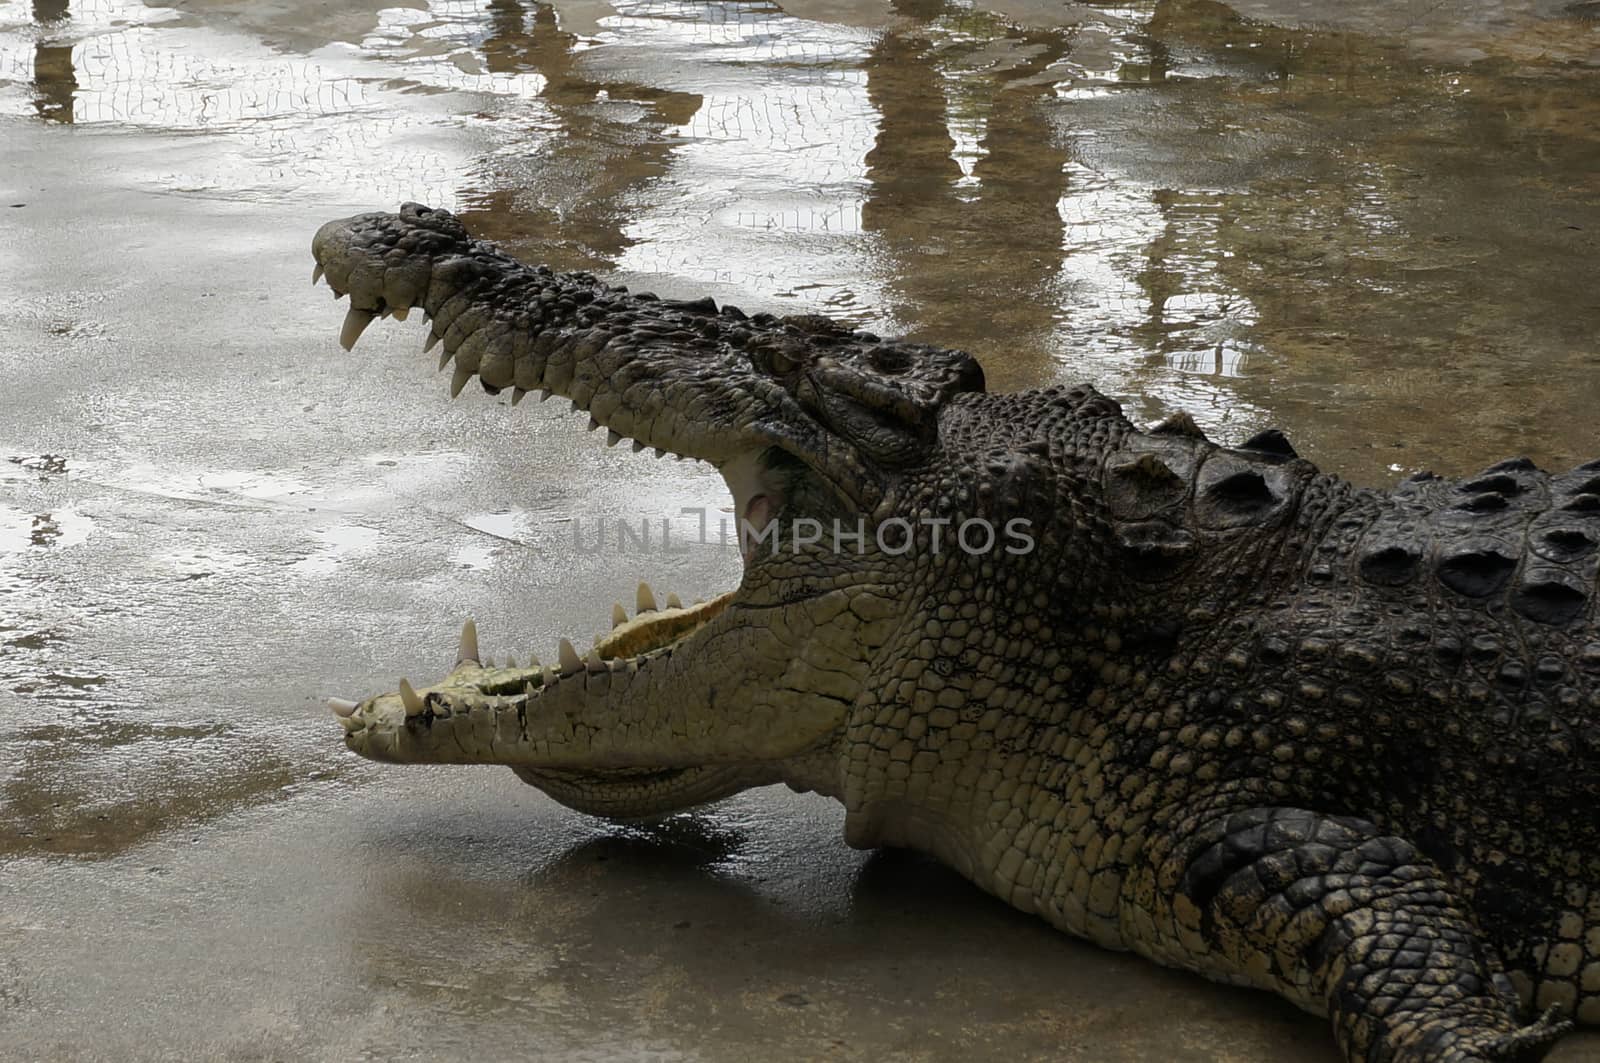 A huge crocodile with open mouth ready to bite prey.